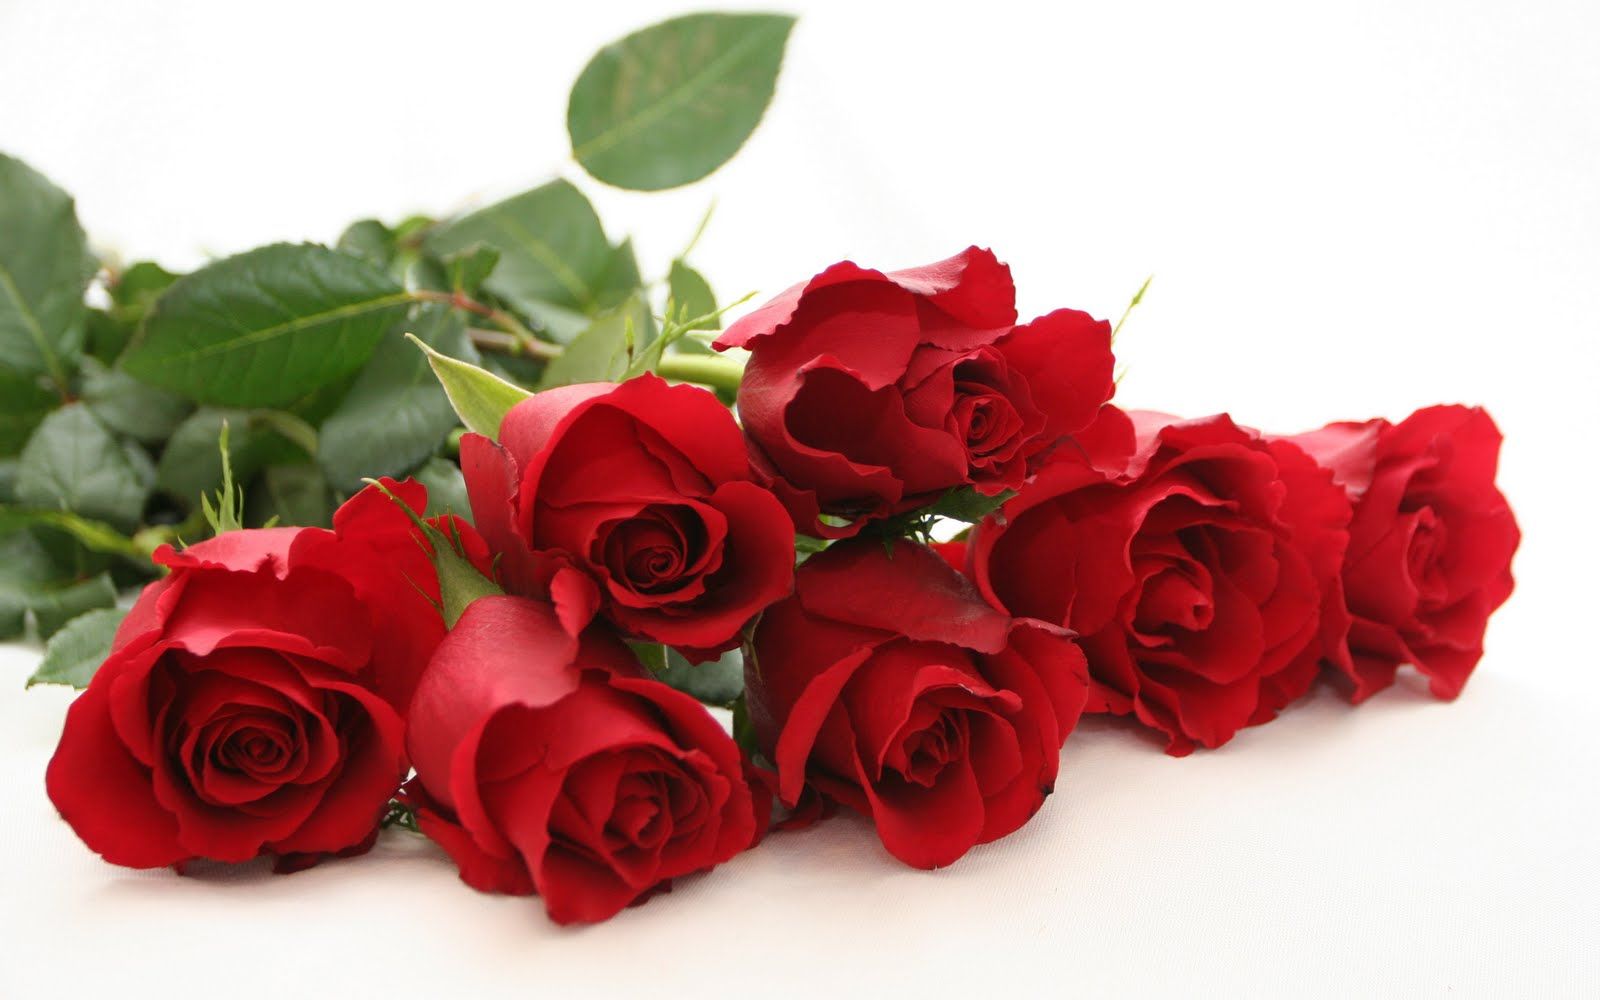 Red Rose HD Wallpaper, Red Rose Photos, New Backgrounds